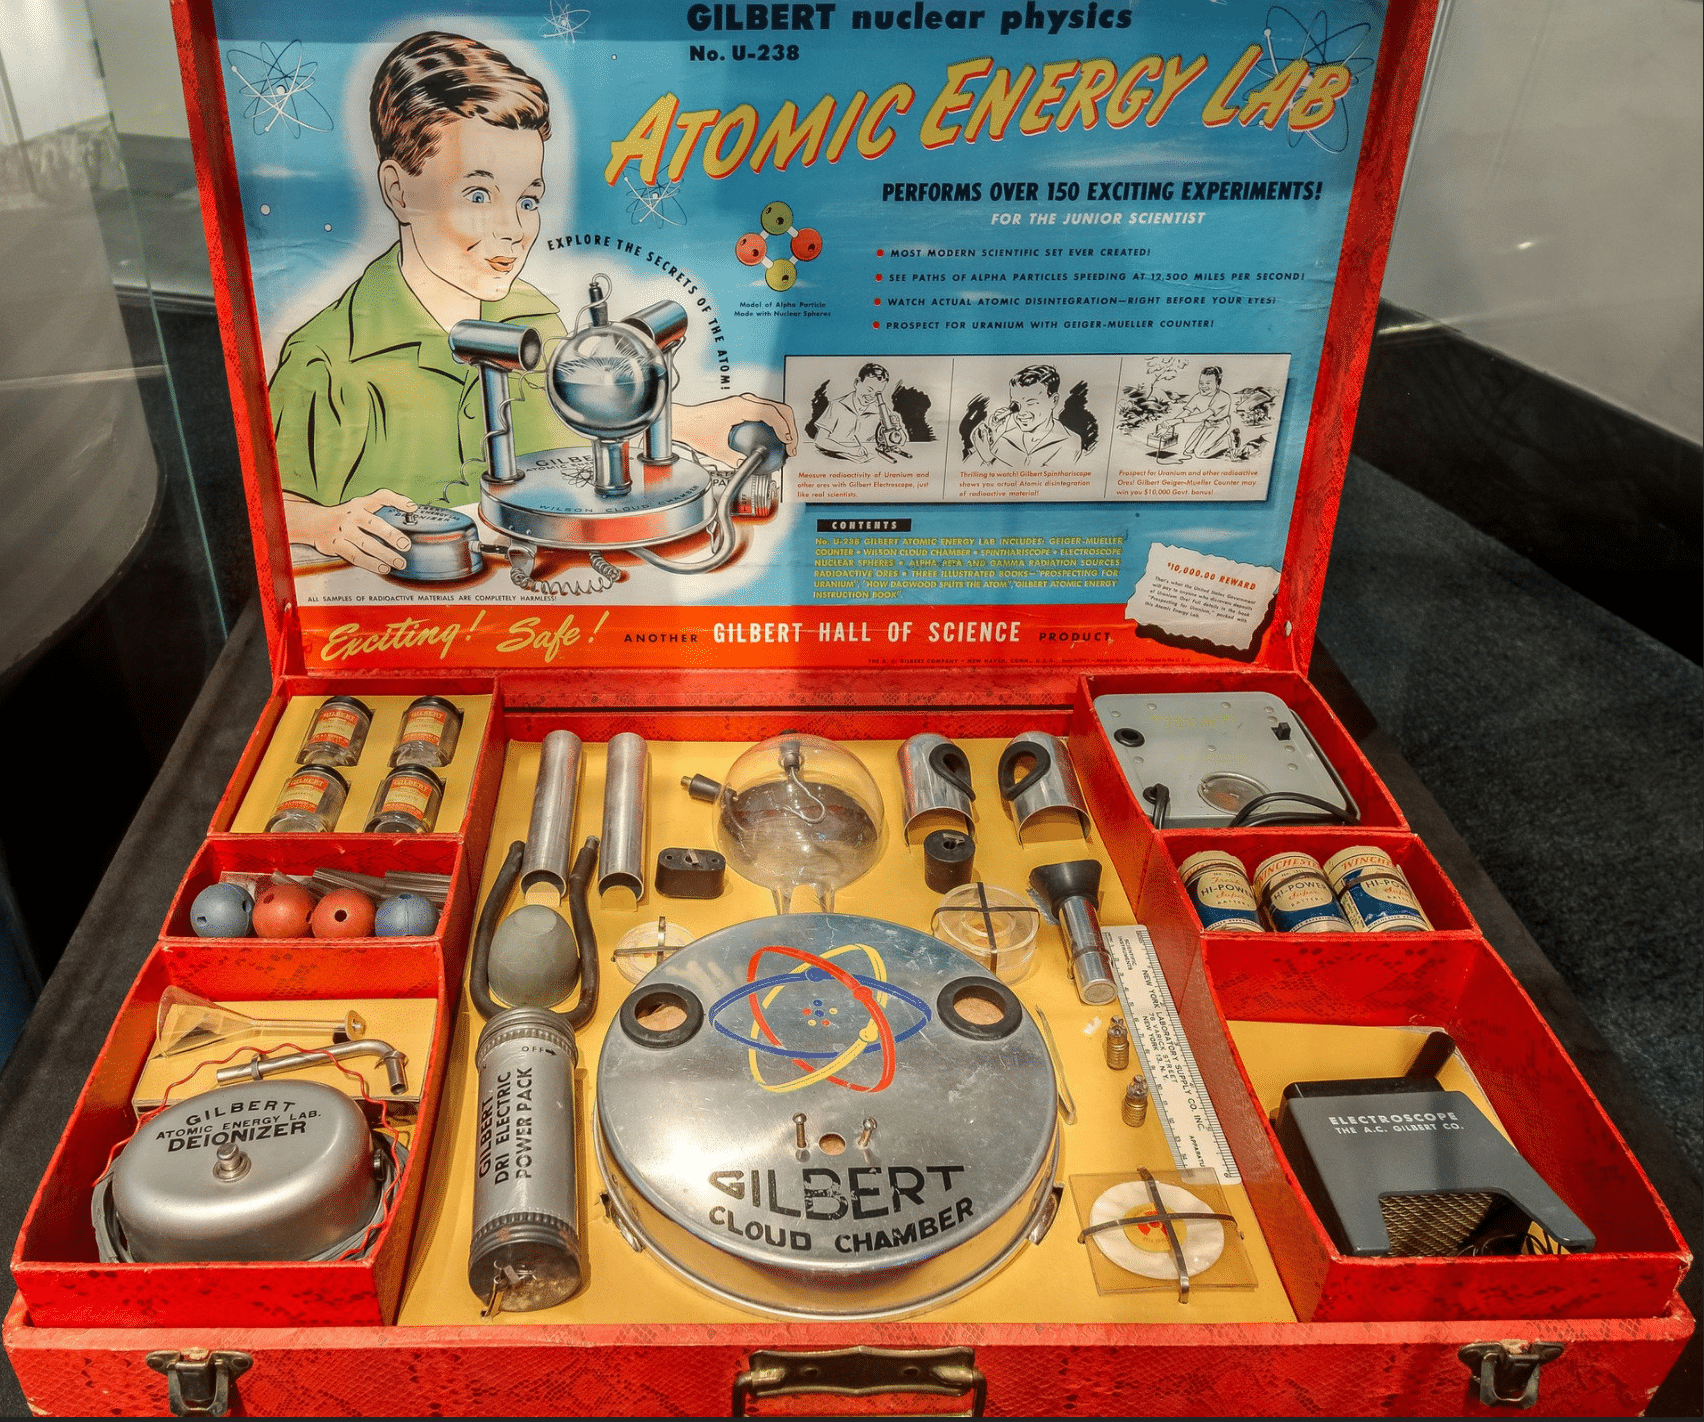 World's Most Dangerous Toy? Radioactive Atomic Energy Lab Kit with